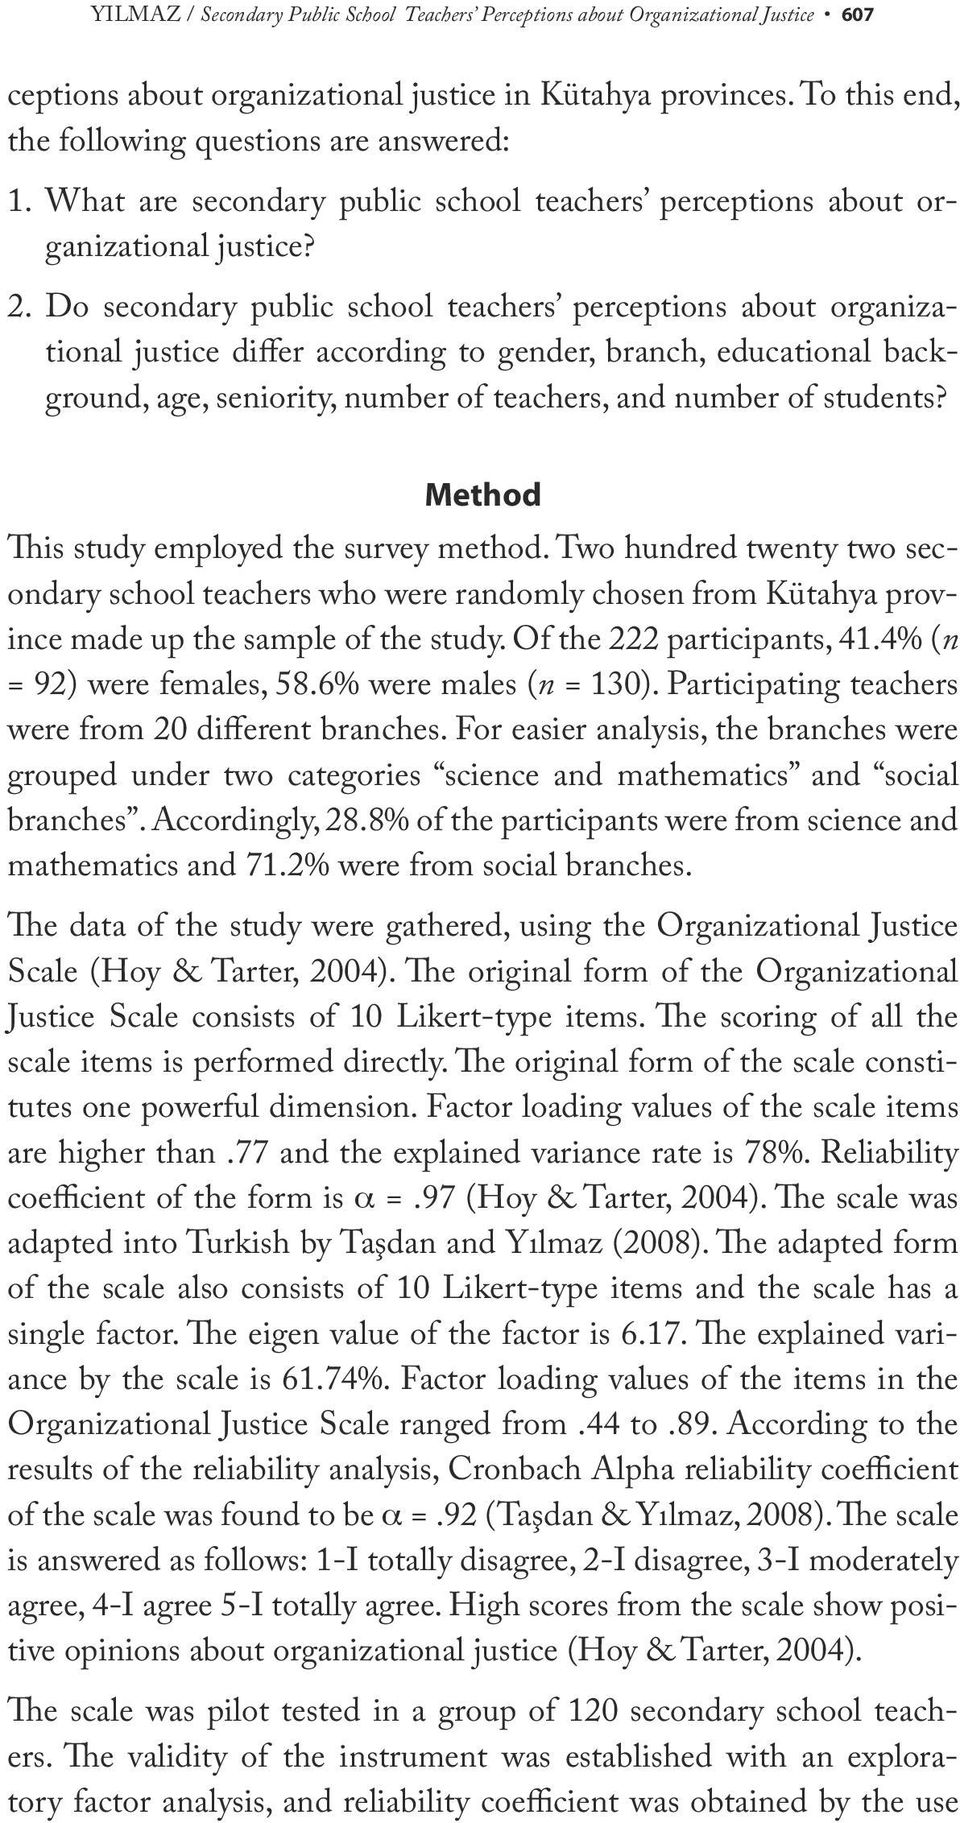 Do secondary public school teachers perceptions about organizational justice differ according to gender, branch, educational background, age, seniority, number of teachers, and number of students?